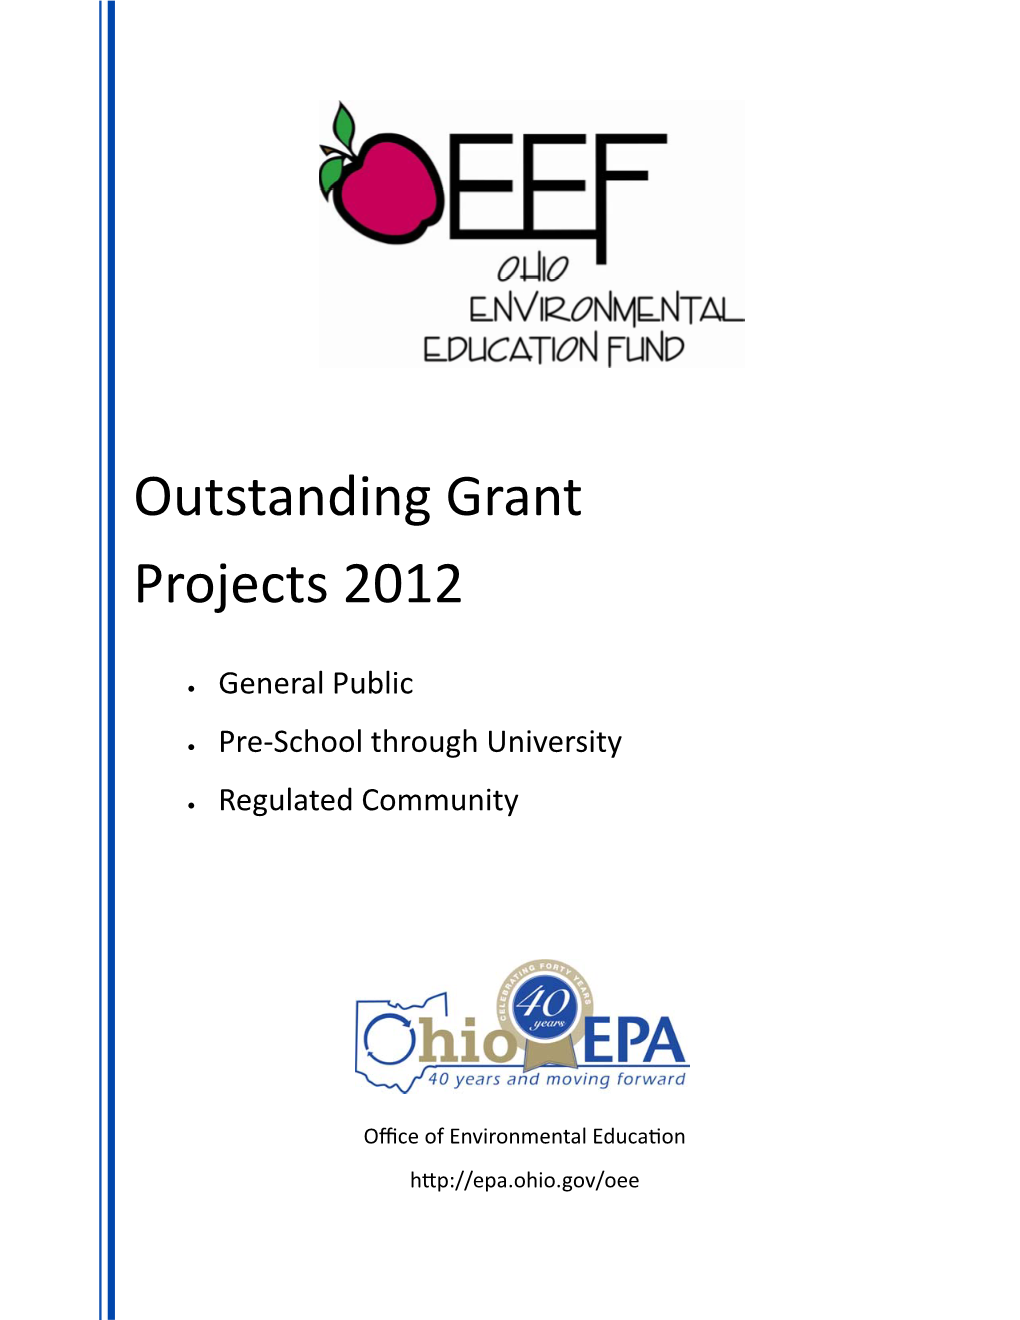 Outstanding Projects Booklet 2011-2012.Pub